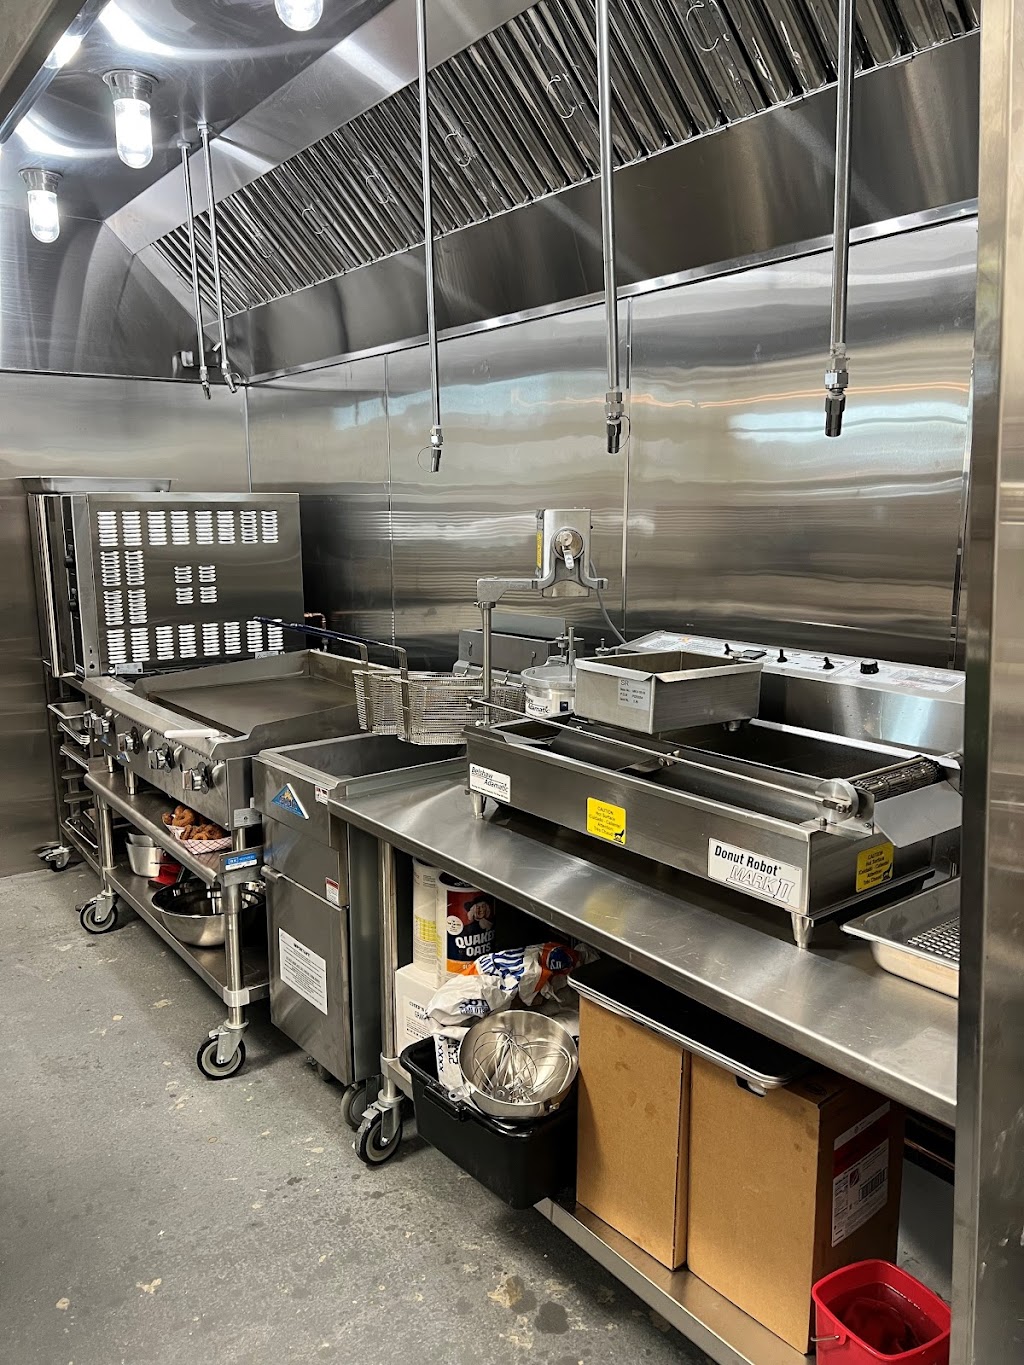 Bob and Don Restaurant Equipment & Commercial Kitchen Design | 6900 Houston Rd STE 14, Florence, KY 41042 | Phone: (859) 384-1497